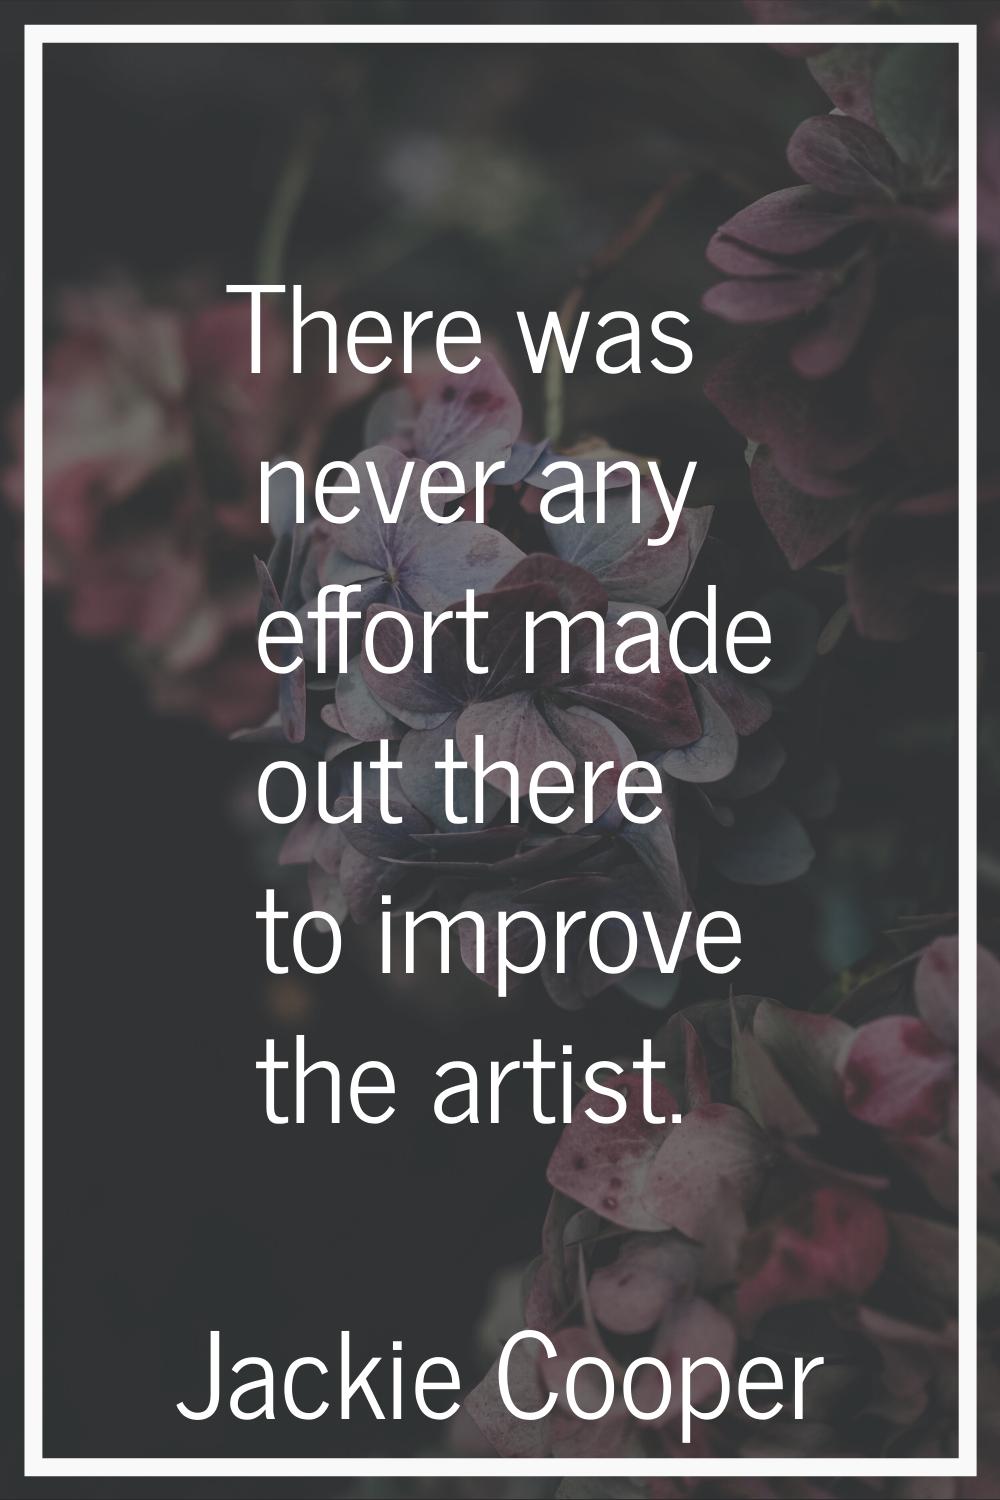 There was never any effort made out there to improve the artist.